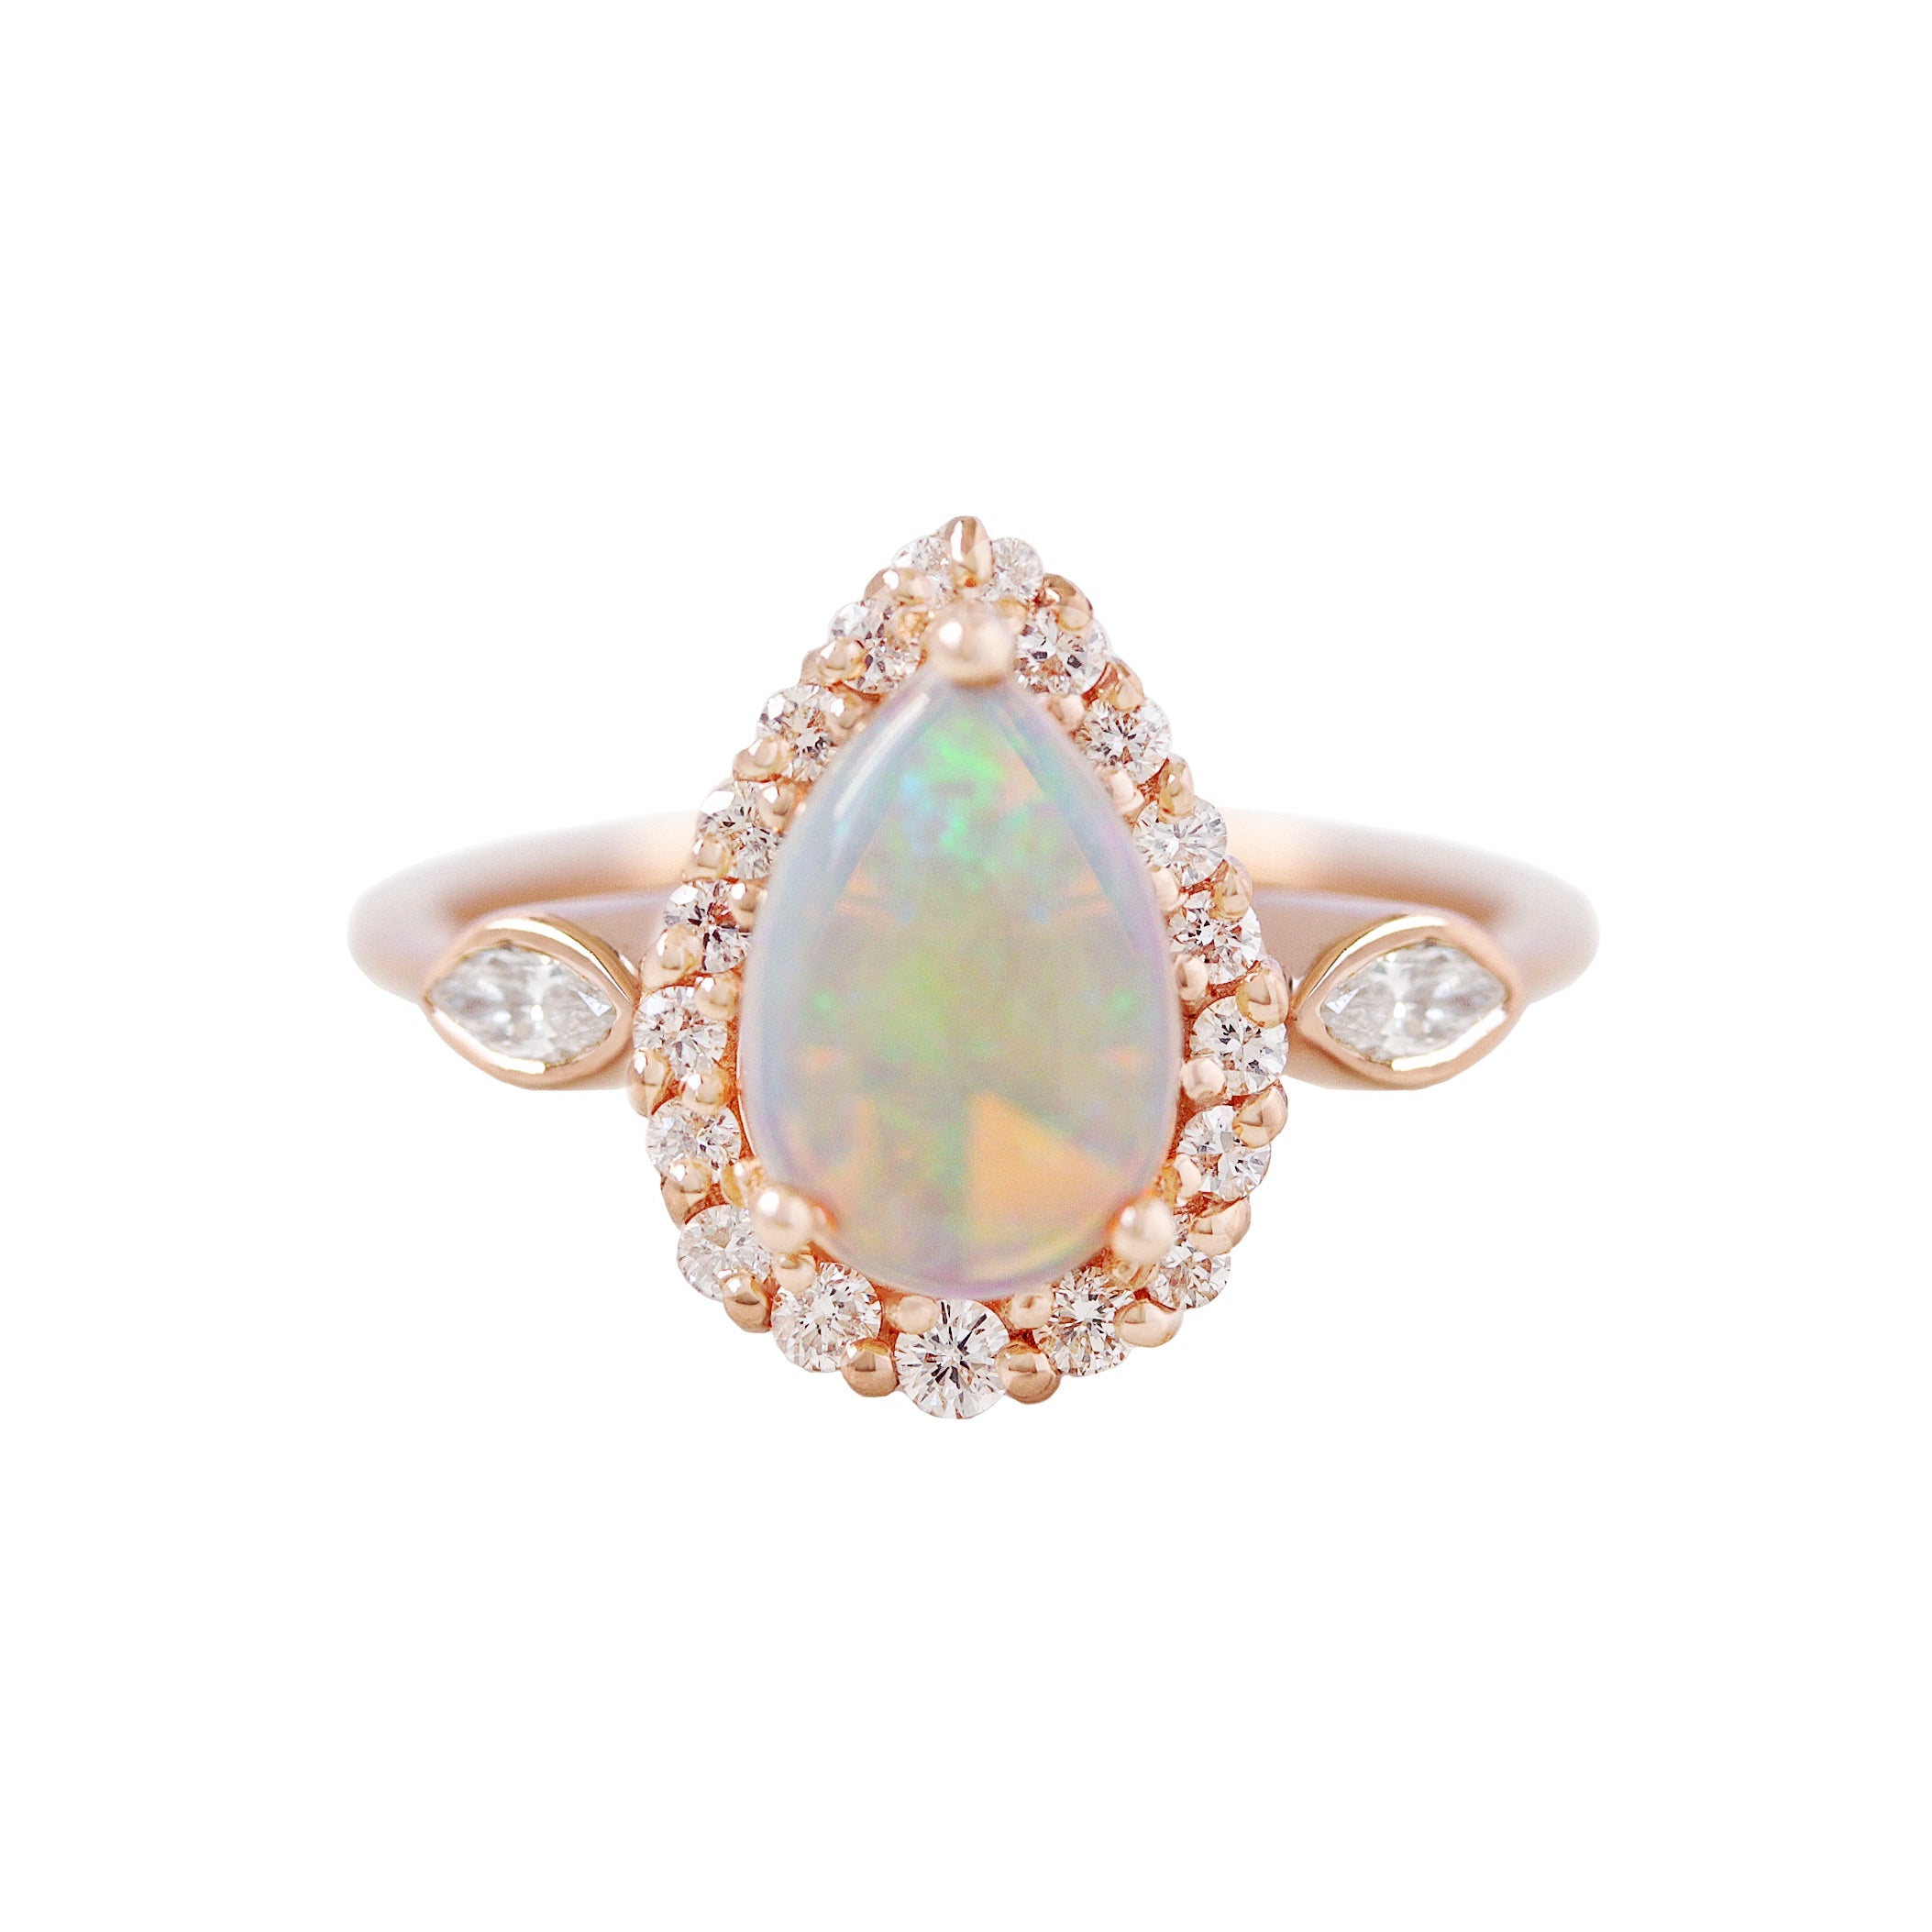 Pear Opal Marquise Diamond Halo Engagement Ring, 14K Rose Gold, 'Zoe', READY TO SHIP! ♥